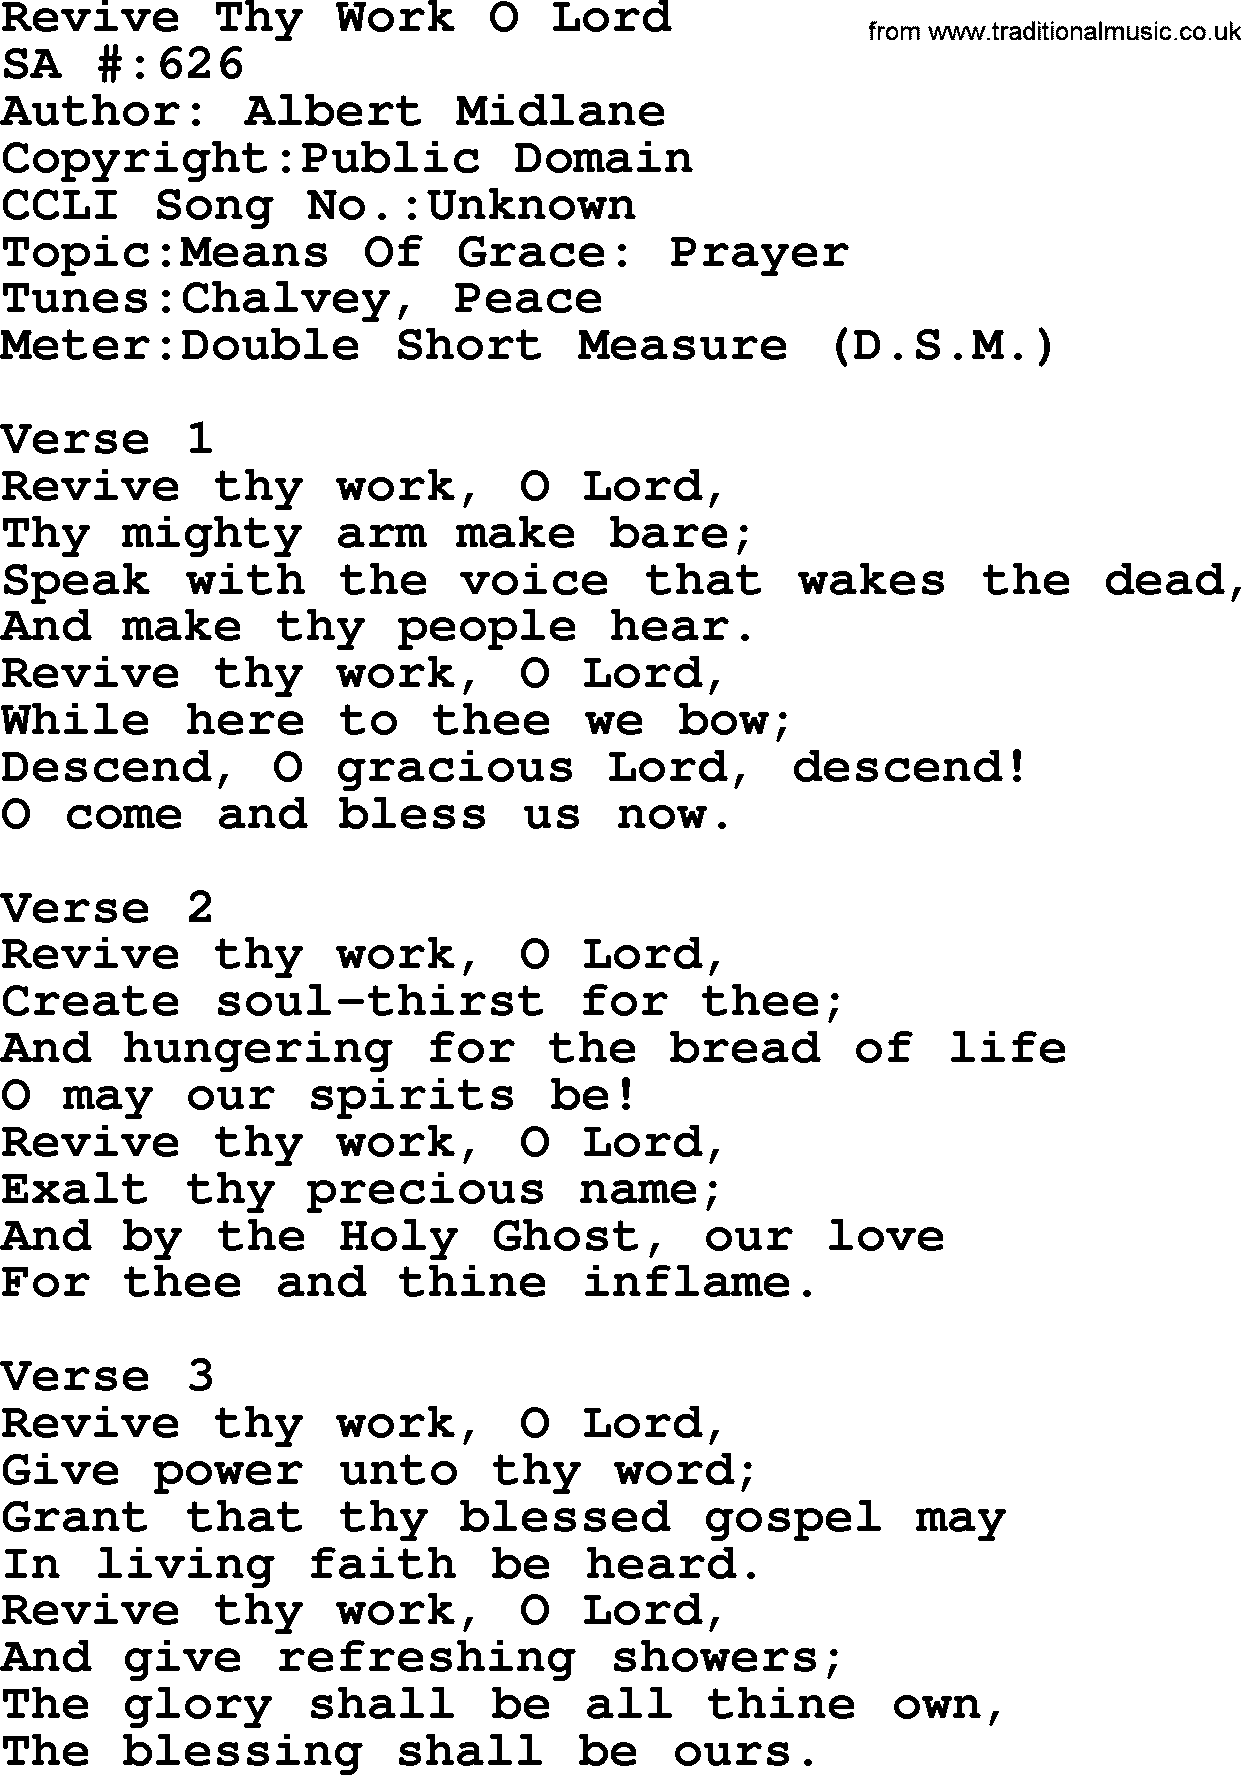 Salvation Army Hymnal, title: Revive Thy Work O Lord, with lyrics and PDF,